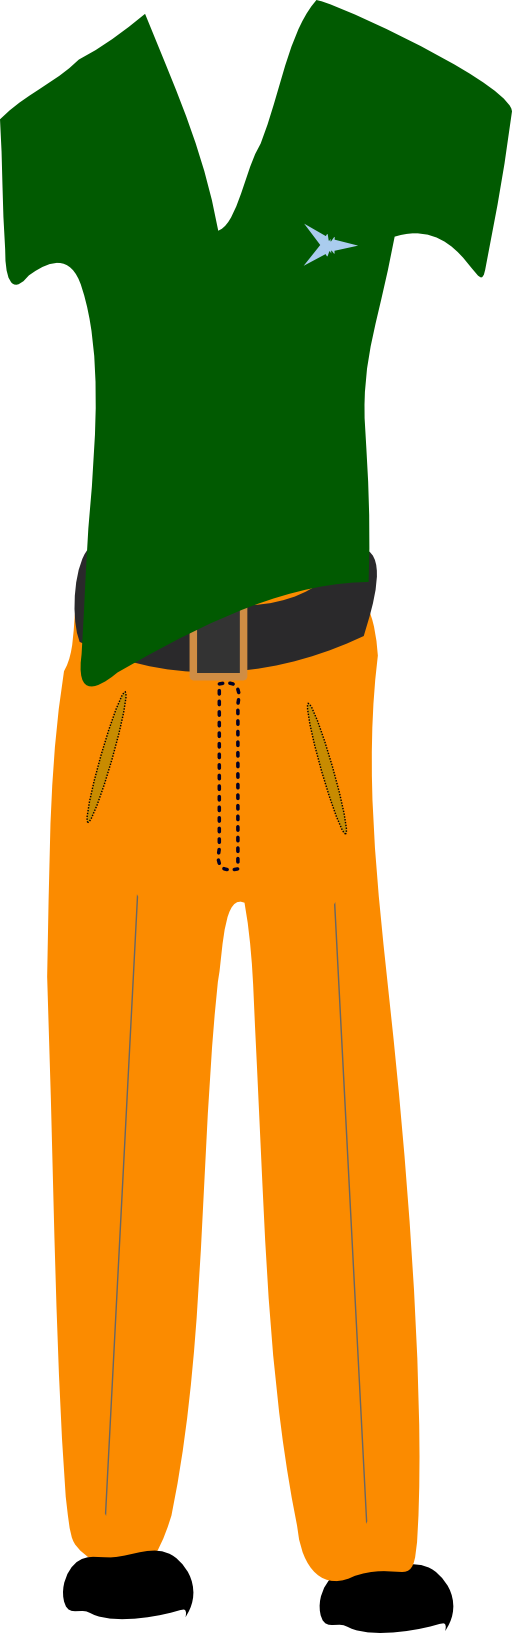 Man in casual clothing clipart